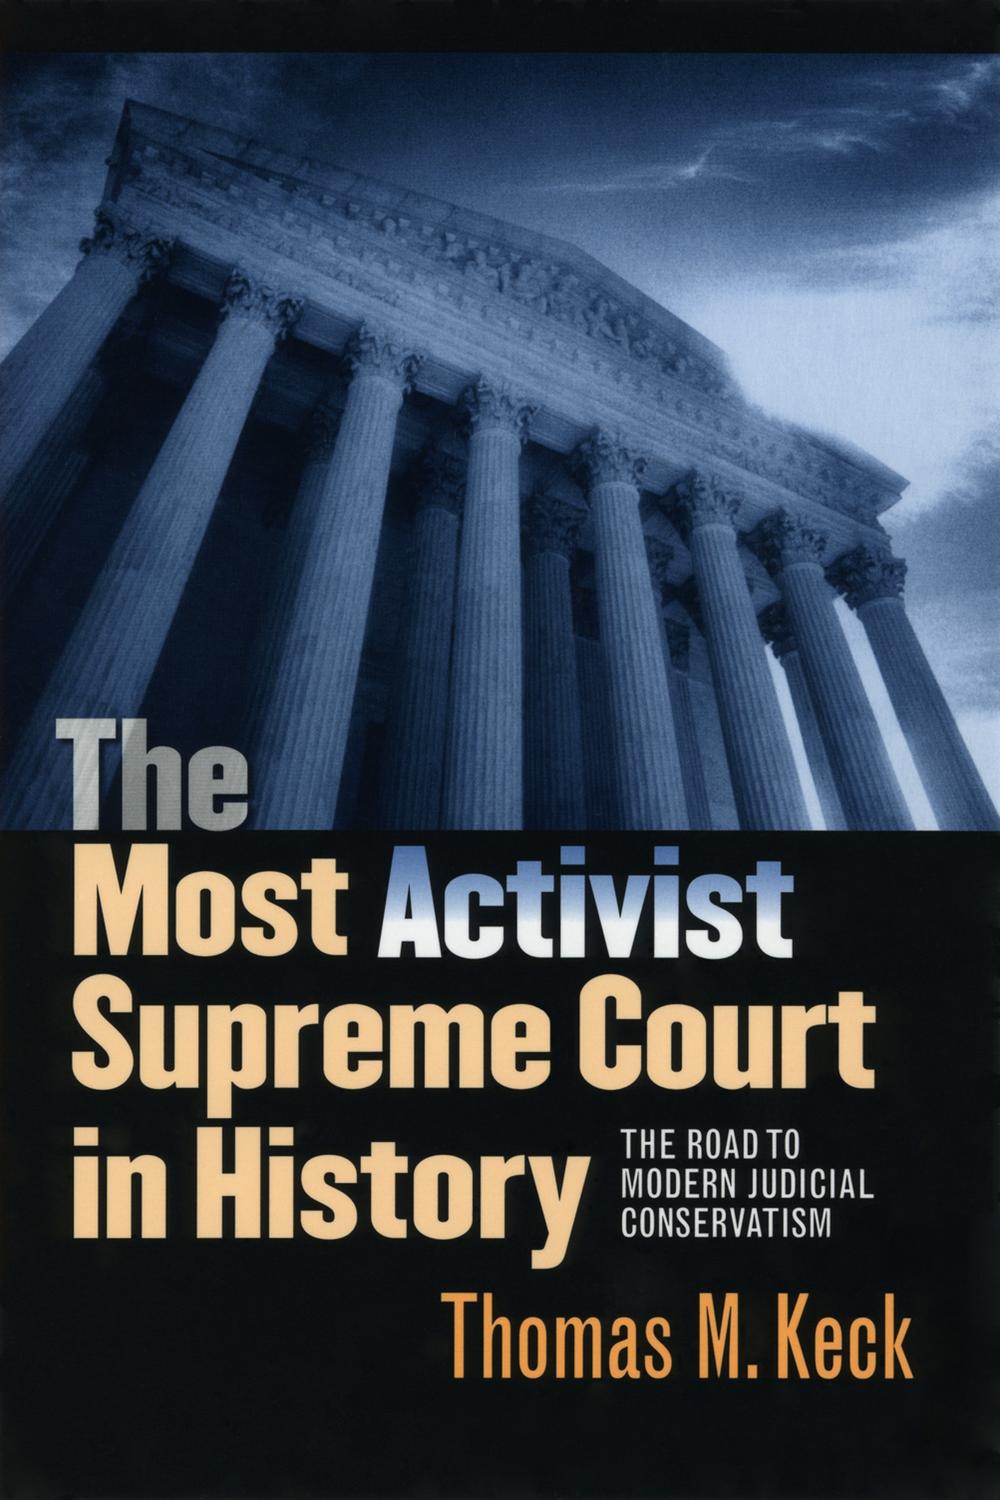 The Most Activist Supreme Court in History - Thomas M. Keck